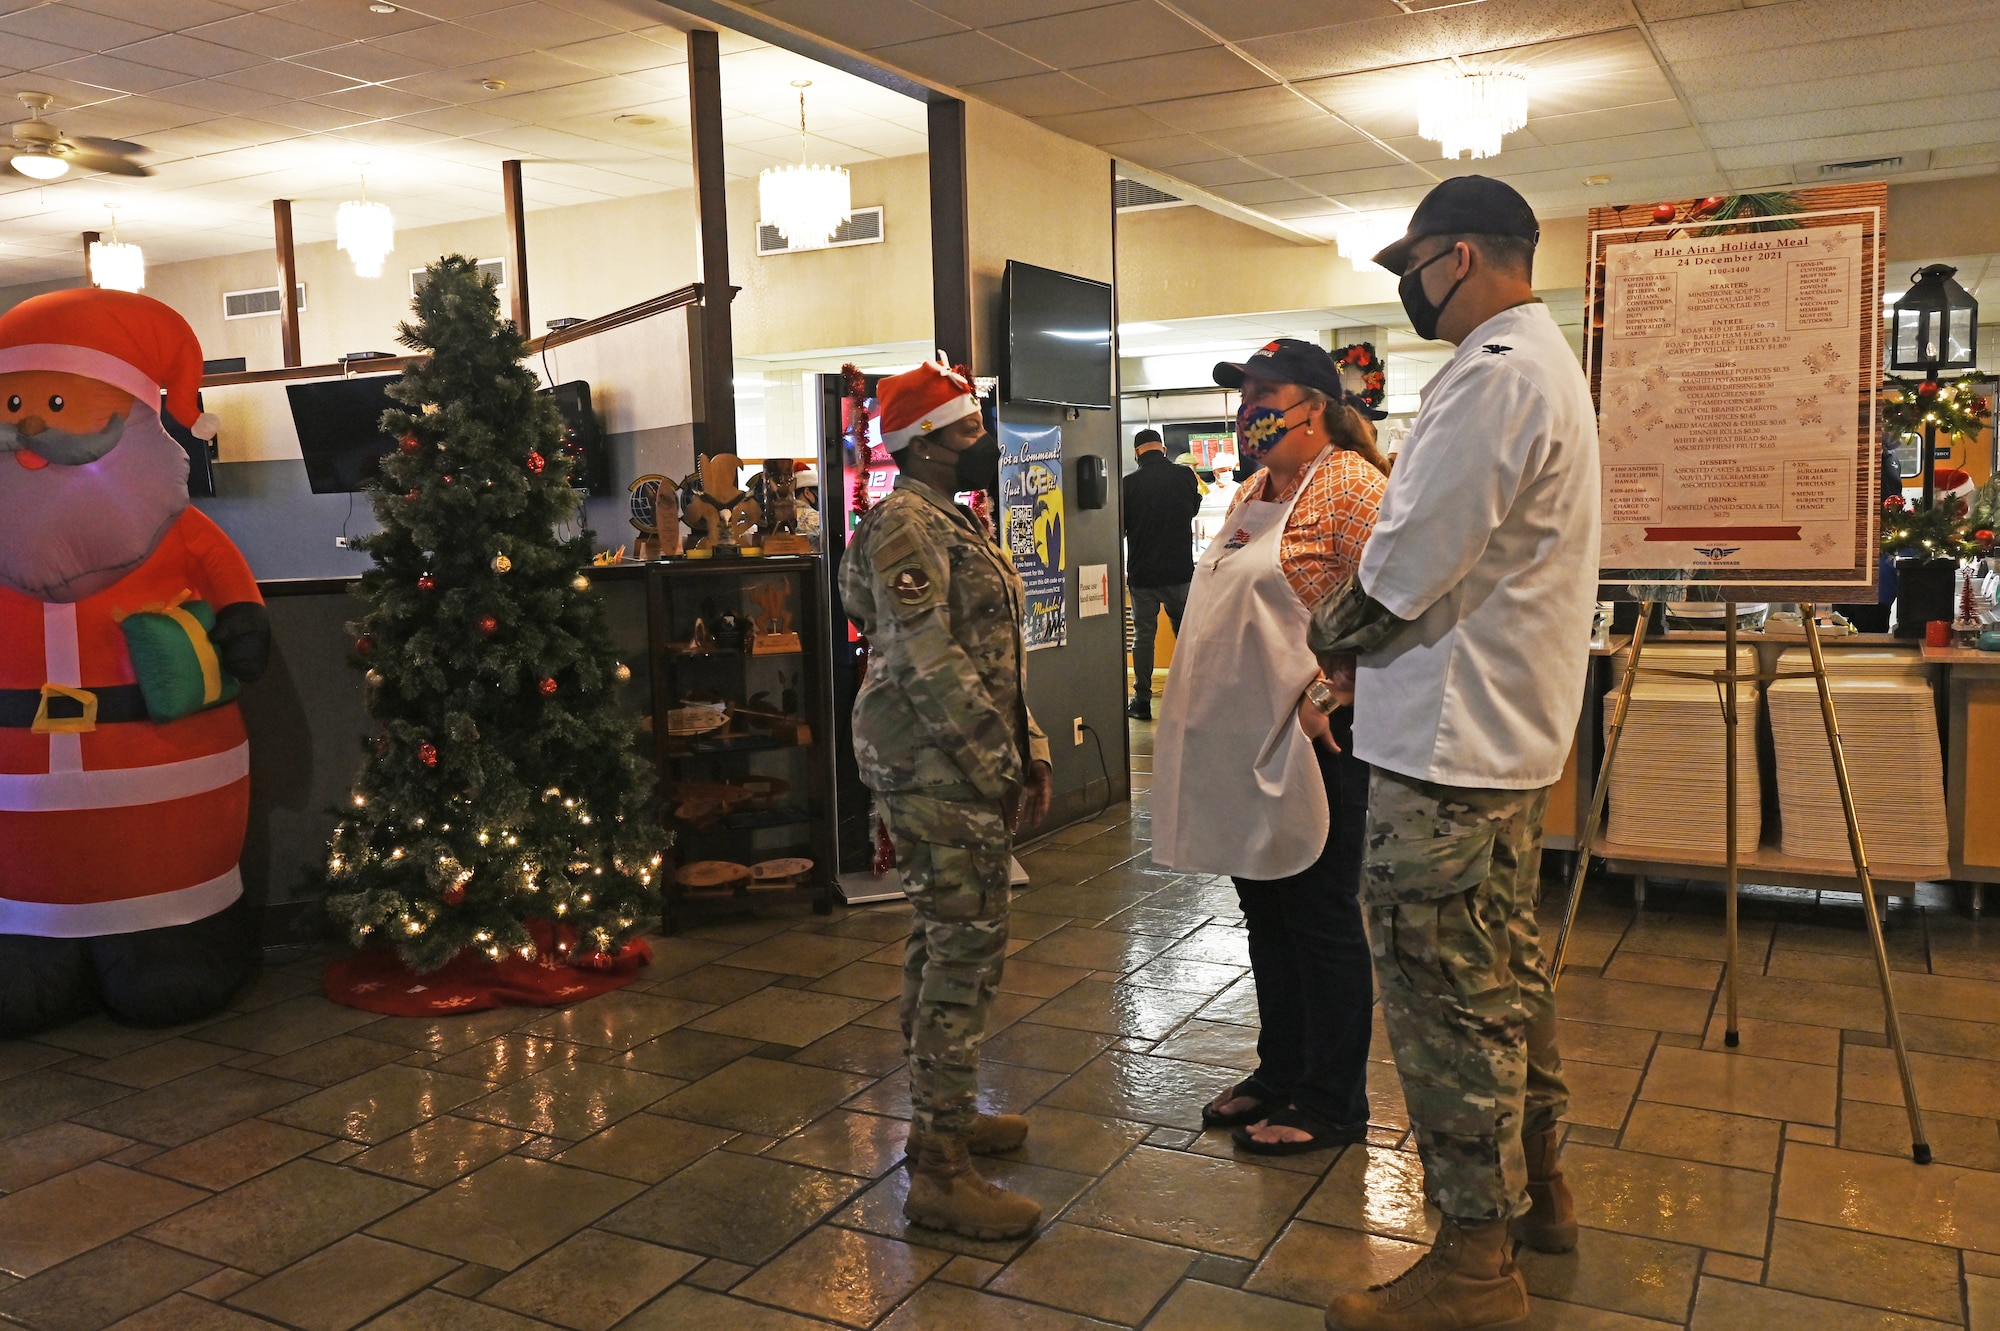 Col. Daniel Dobbels, 15th Wing commander and his wife, Lisa Dobbels greet airmen on Christmas eve at the Hale Aina Dining Facility, Dec. 24, 2021. Leaders from Joint Base Pearl Harbor-Hickam served airmen and their families lunch on Christmas eve. (U.S. Air Force photo by 1st Lieutenant Denise Guiao-Corpuz)